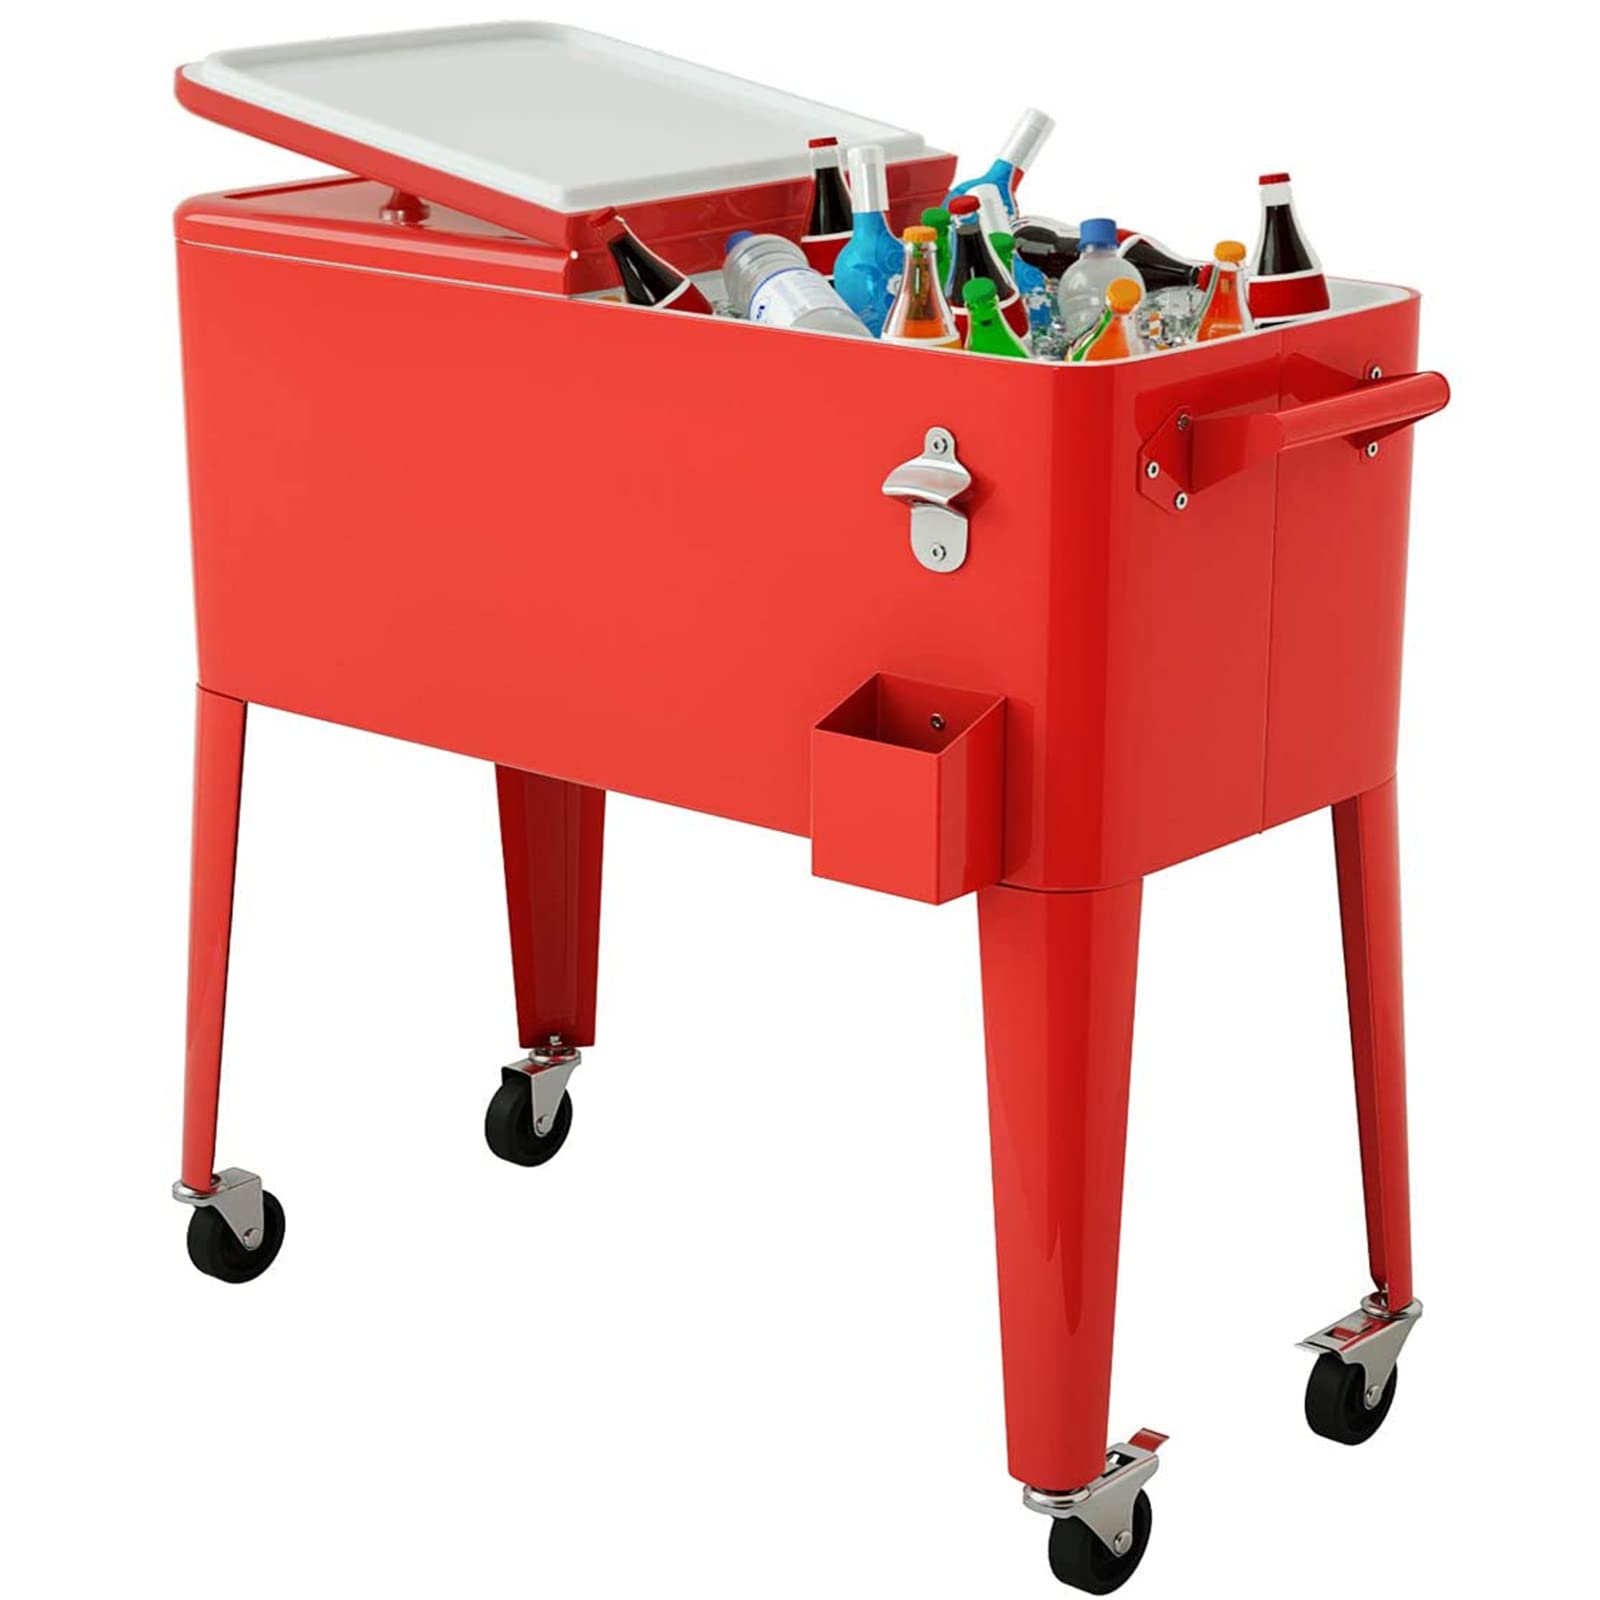 80 Quart Cooler Cart Outdoor Cooler Cart ,Portable Cooler with Casters,Red Metal